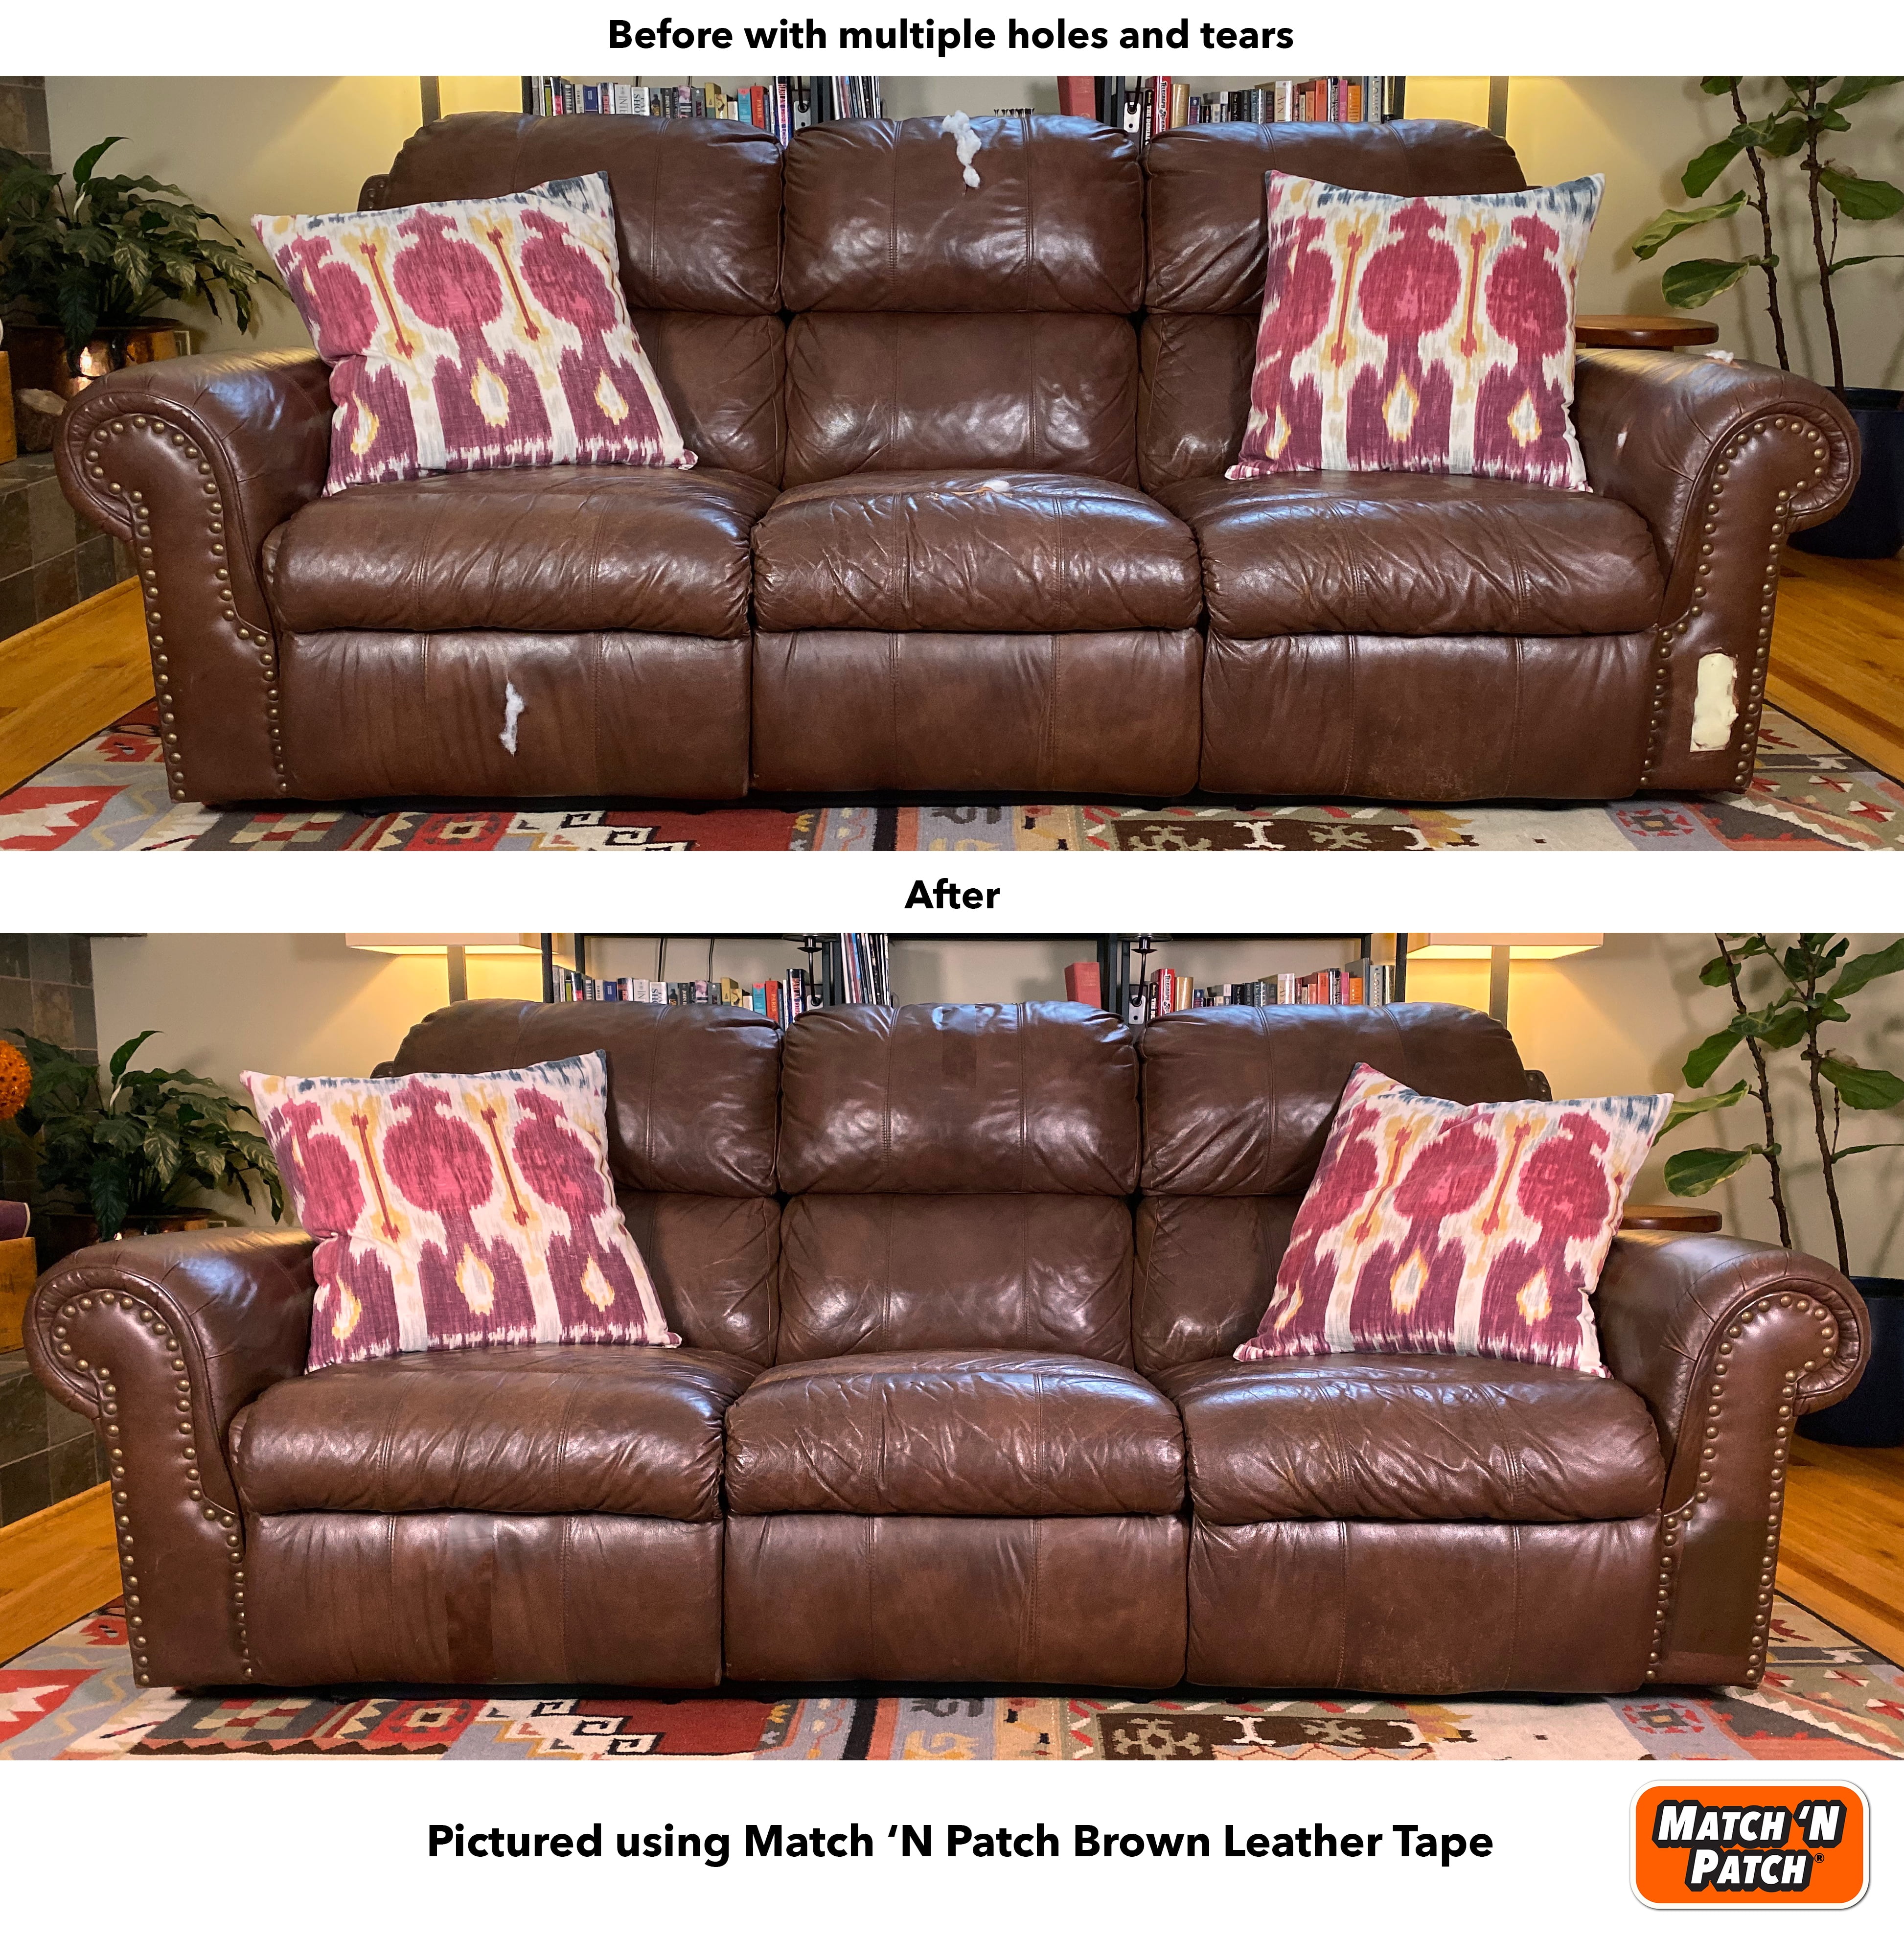 N Patch Dark Brown Leather Repair Tape, Patches For Leather Couches